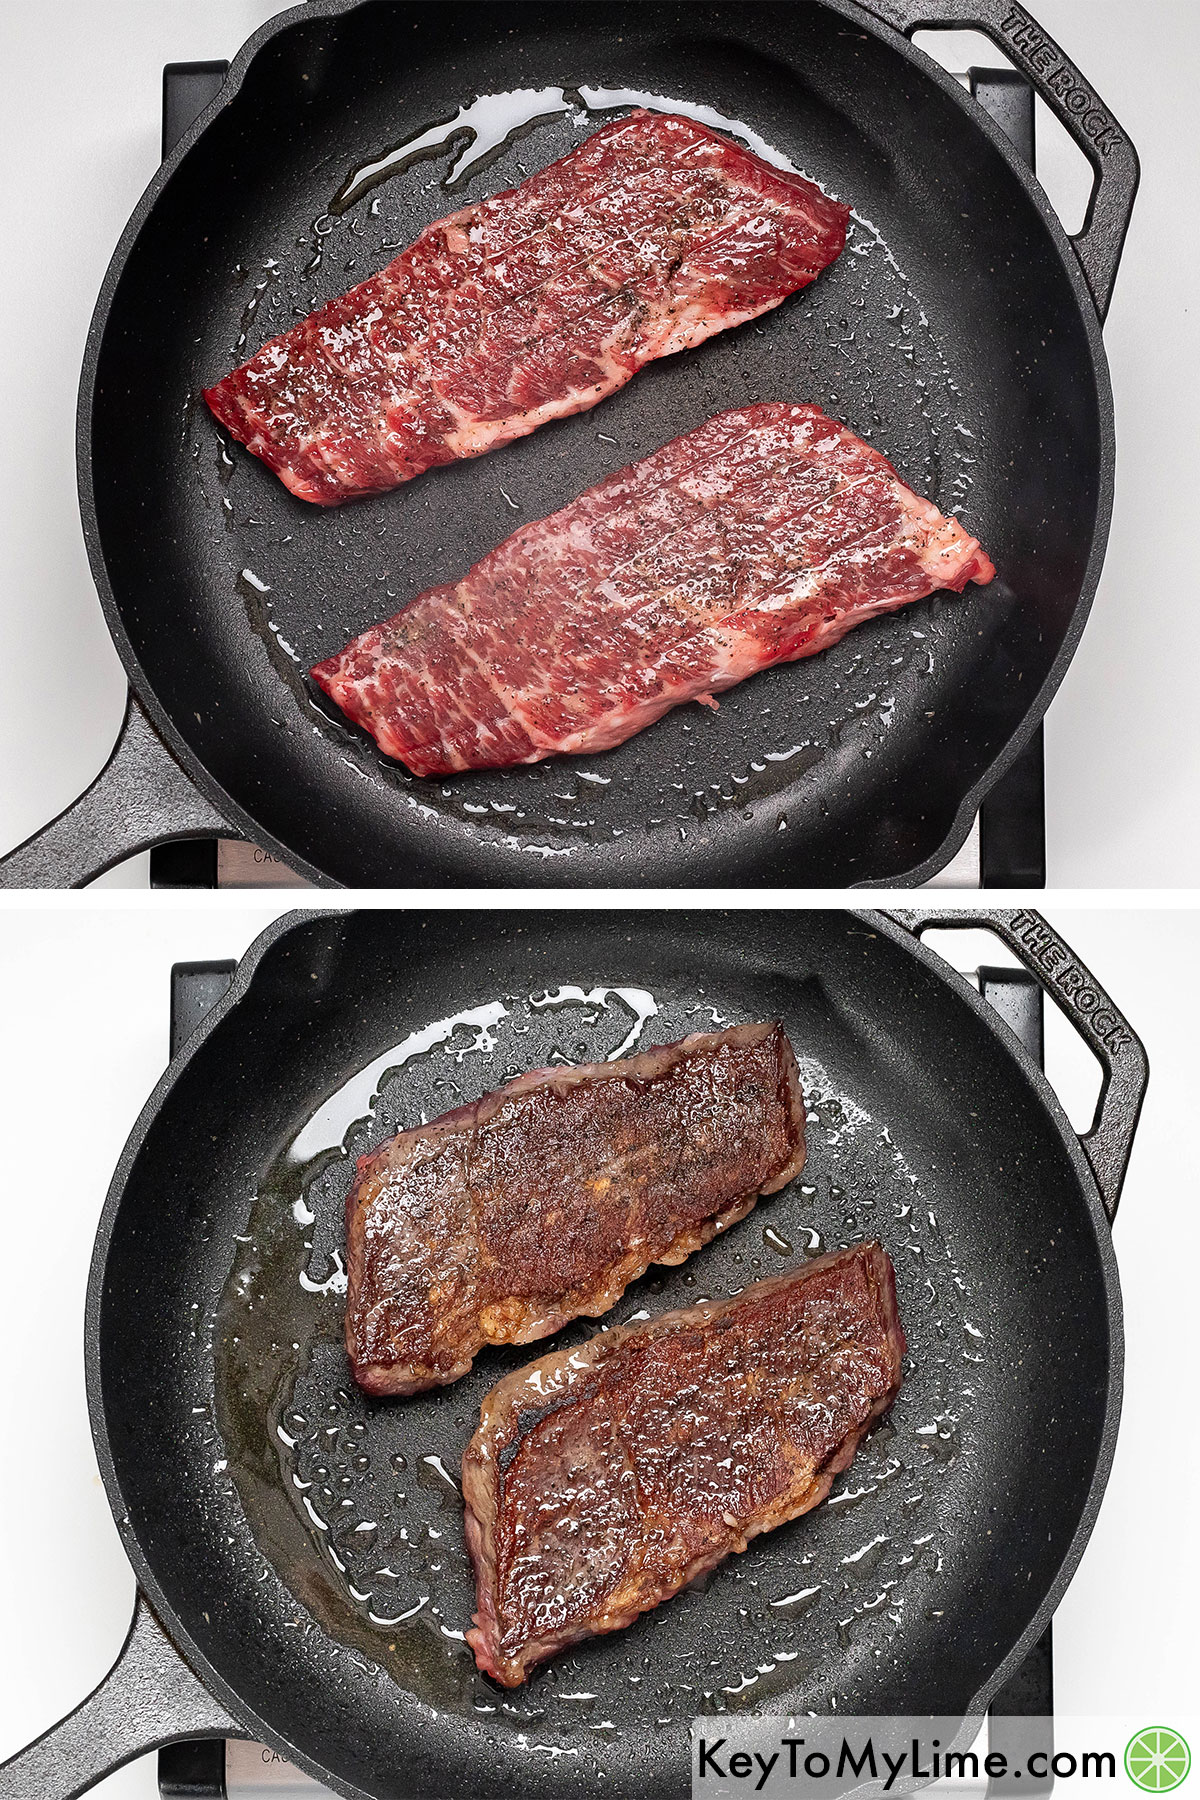 Adding the steaks to a hot skillet, and then searing both sides until cooked.